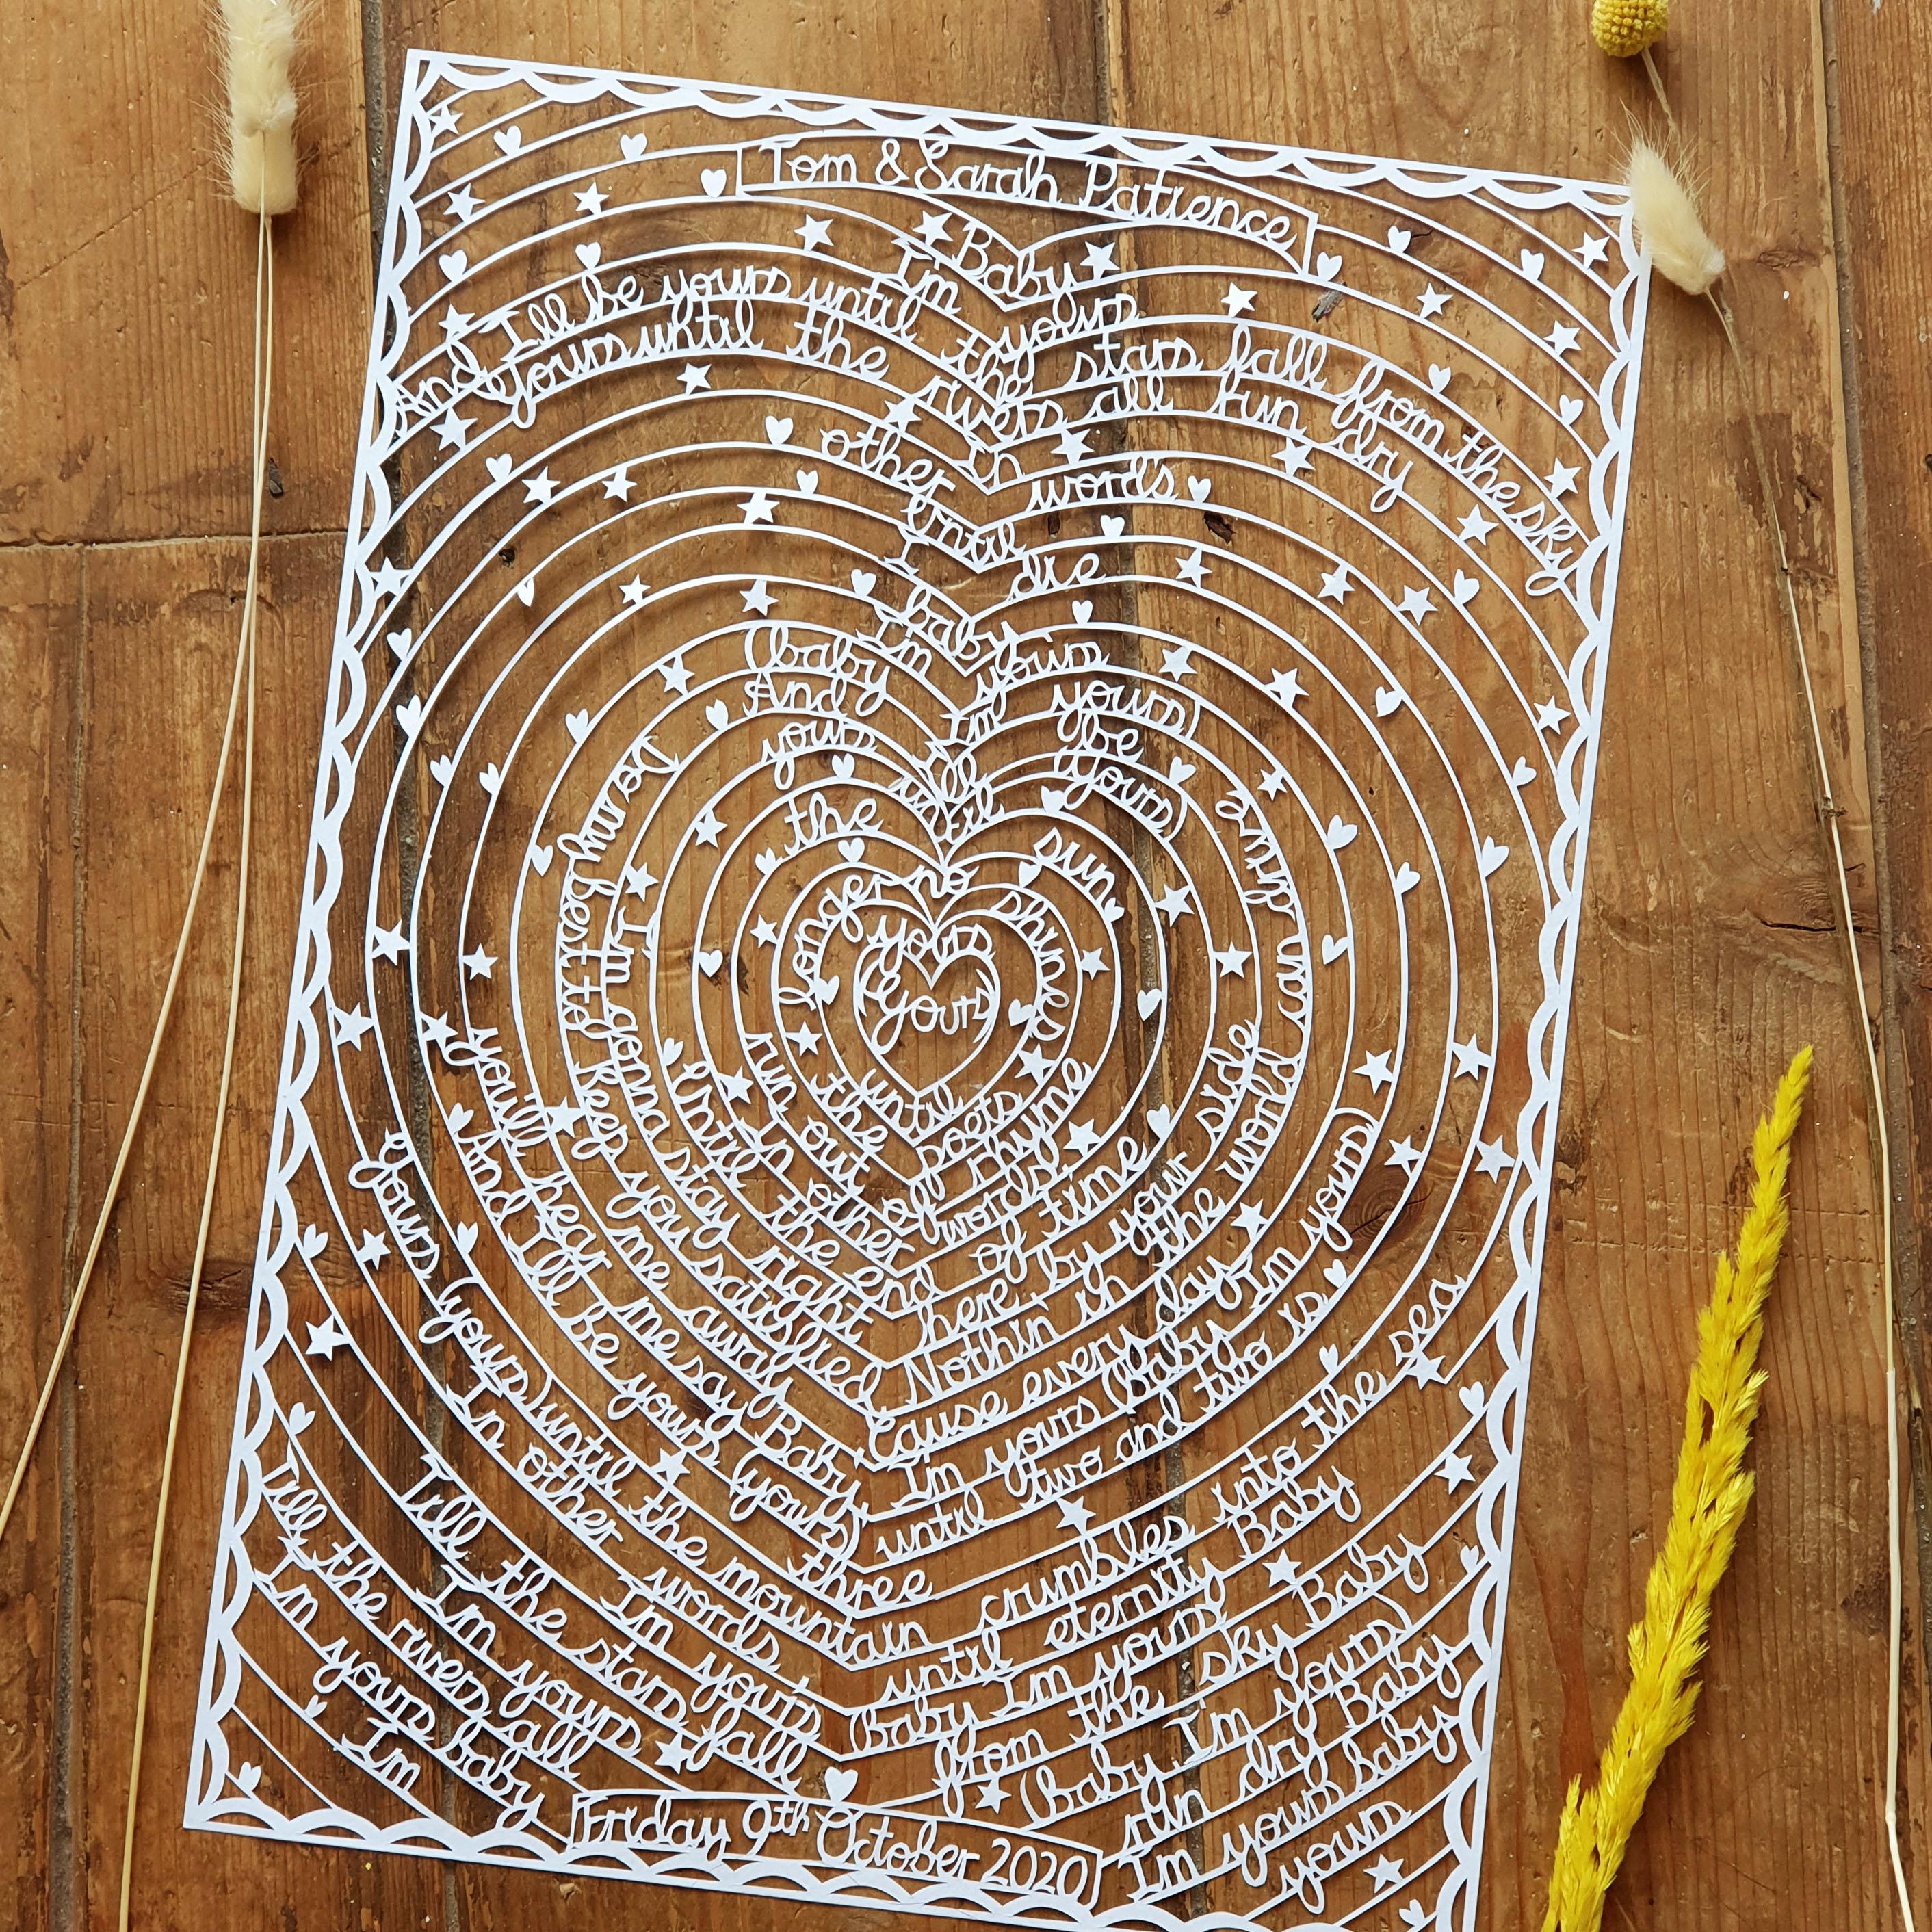 A paper cut featuring song lyrics or wedding vows